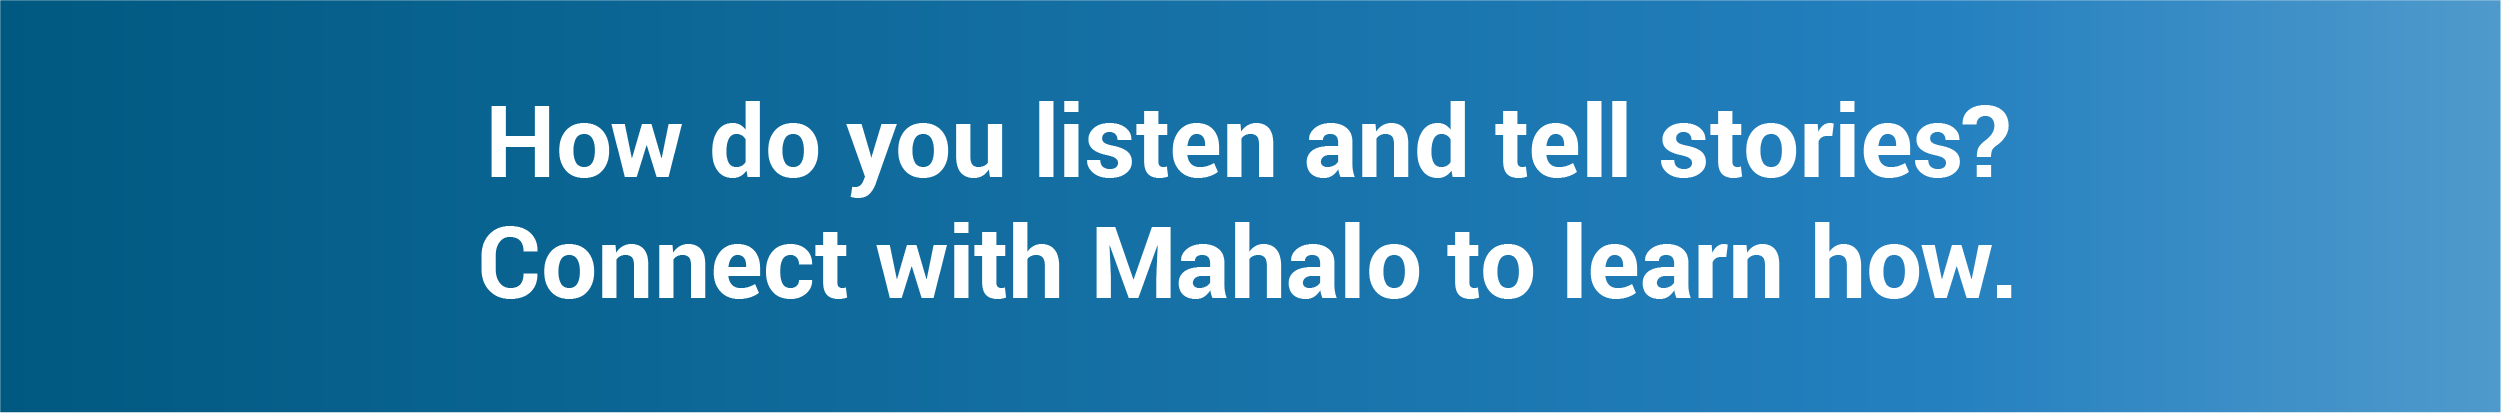 How do you listen and tell stories? Connect with Mahalo and learn how